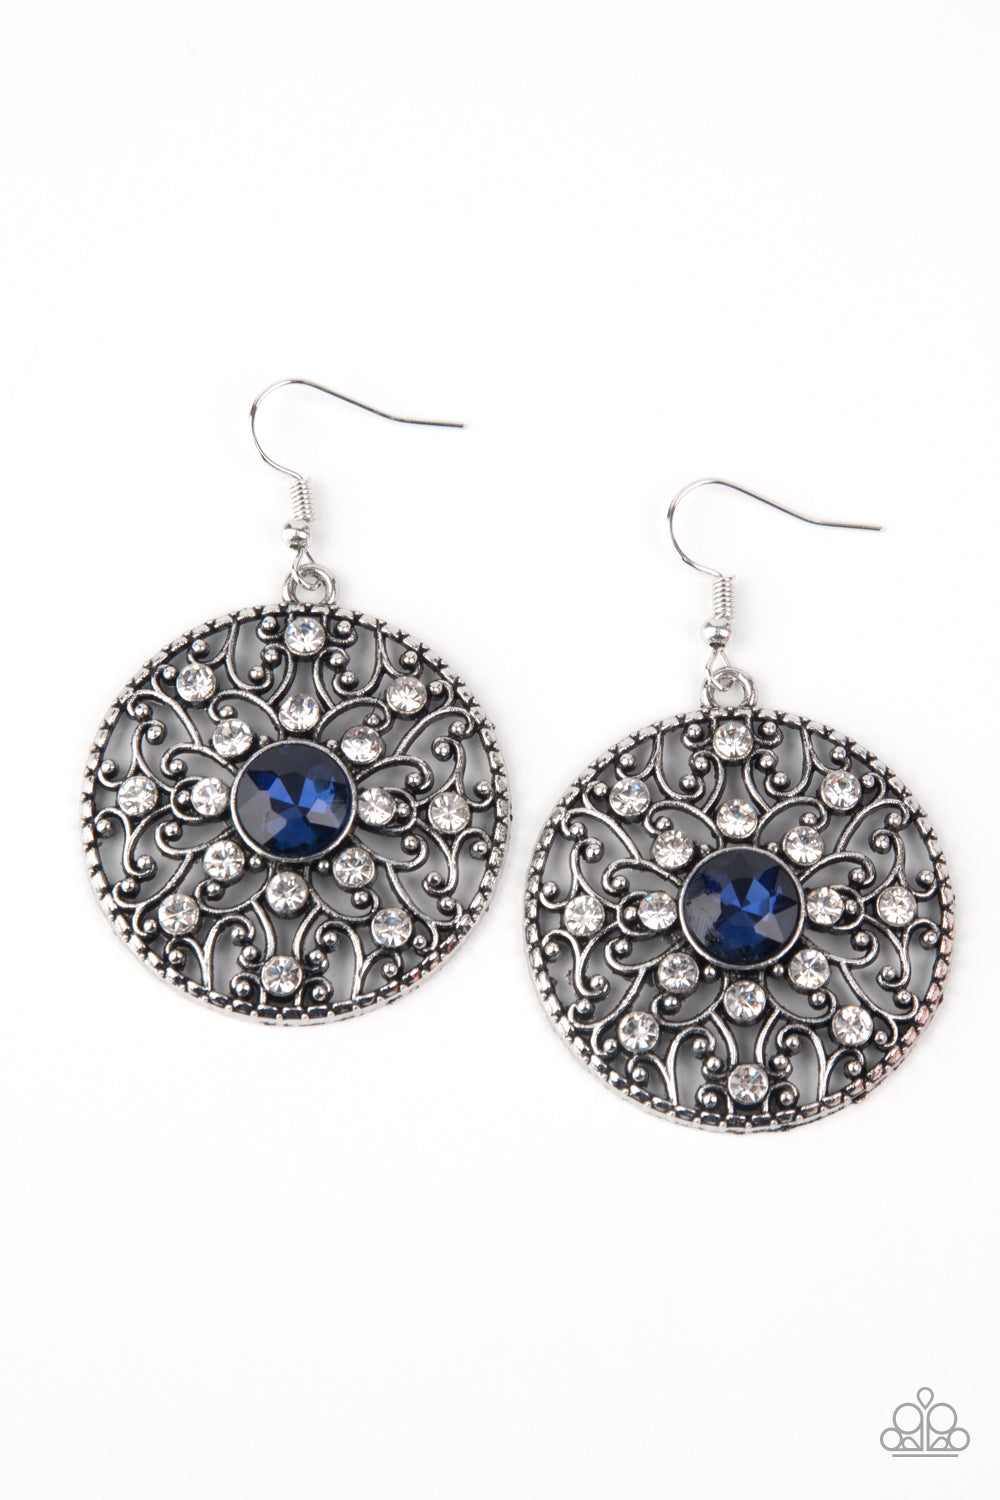 GLOW Your True Colors - Blue and Silver Earrings - Paparazzi Accessories - Dotted in glassy white rhinestones, a backdrop of studded silver vine-like filigree climbs a circular frame. An oversized blue rhinestone embellishes the center for a whimsical finish. Earring attaches to a standard fishhook fitting. Sold as one pair of earrings.